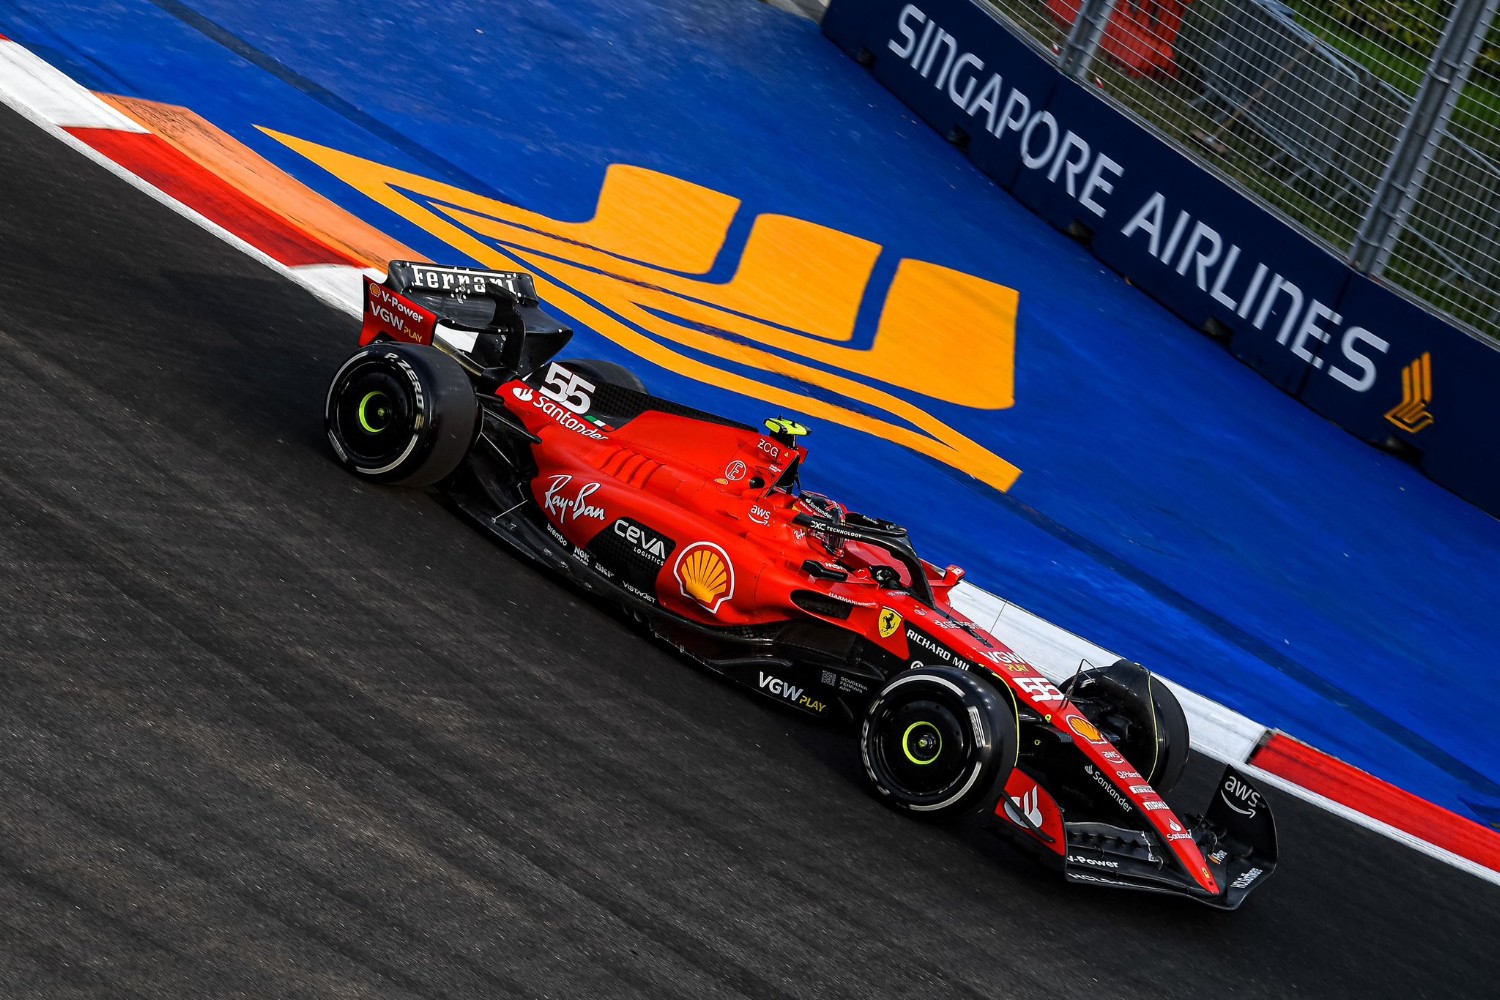 F1 News: Sainz Jr. over Leclerc in Practice 2 for Singapore GP